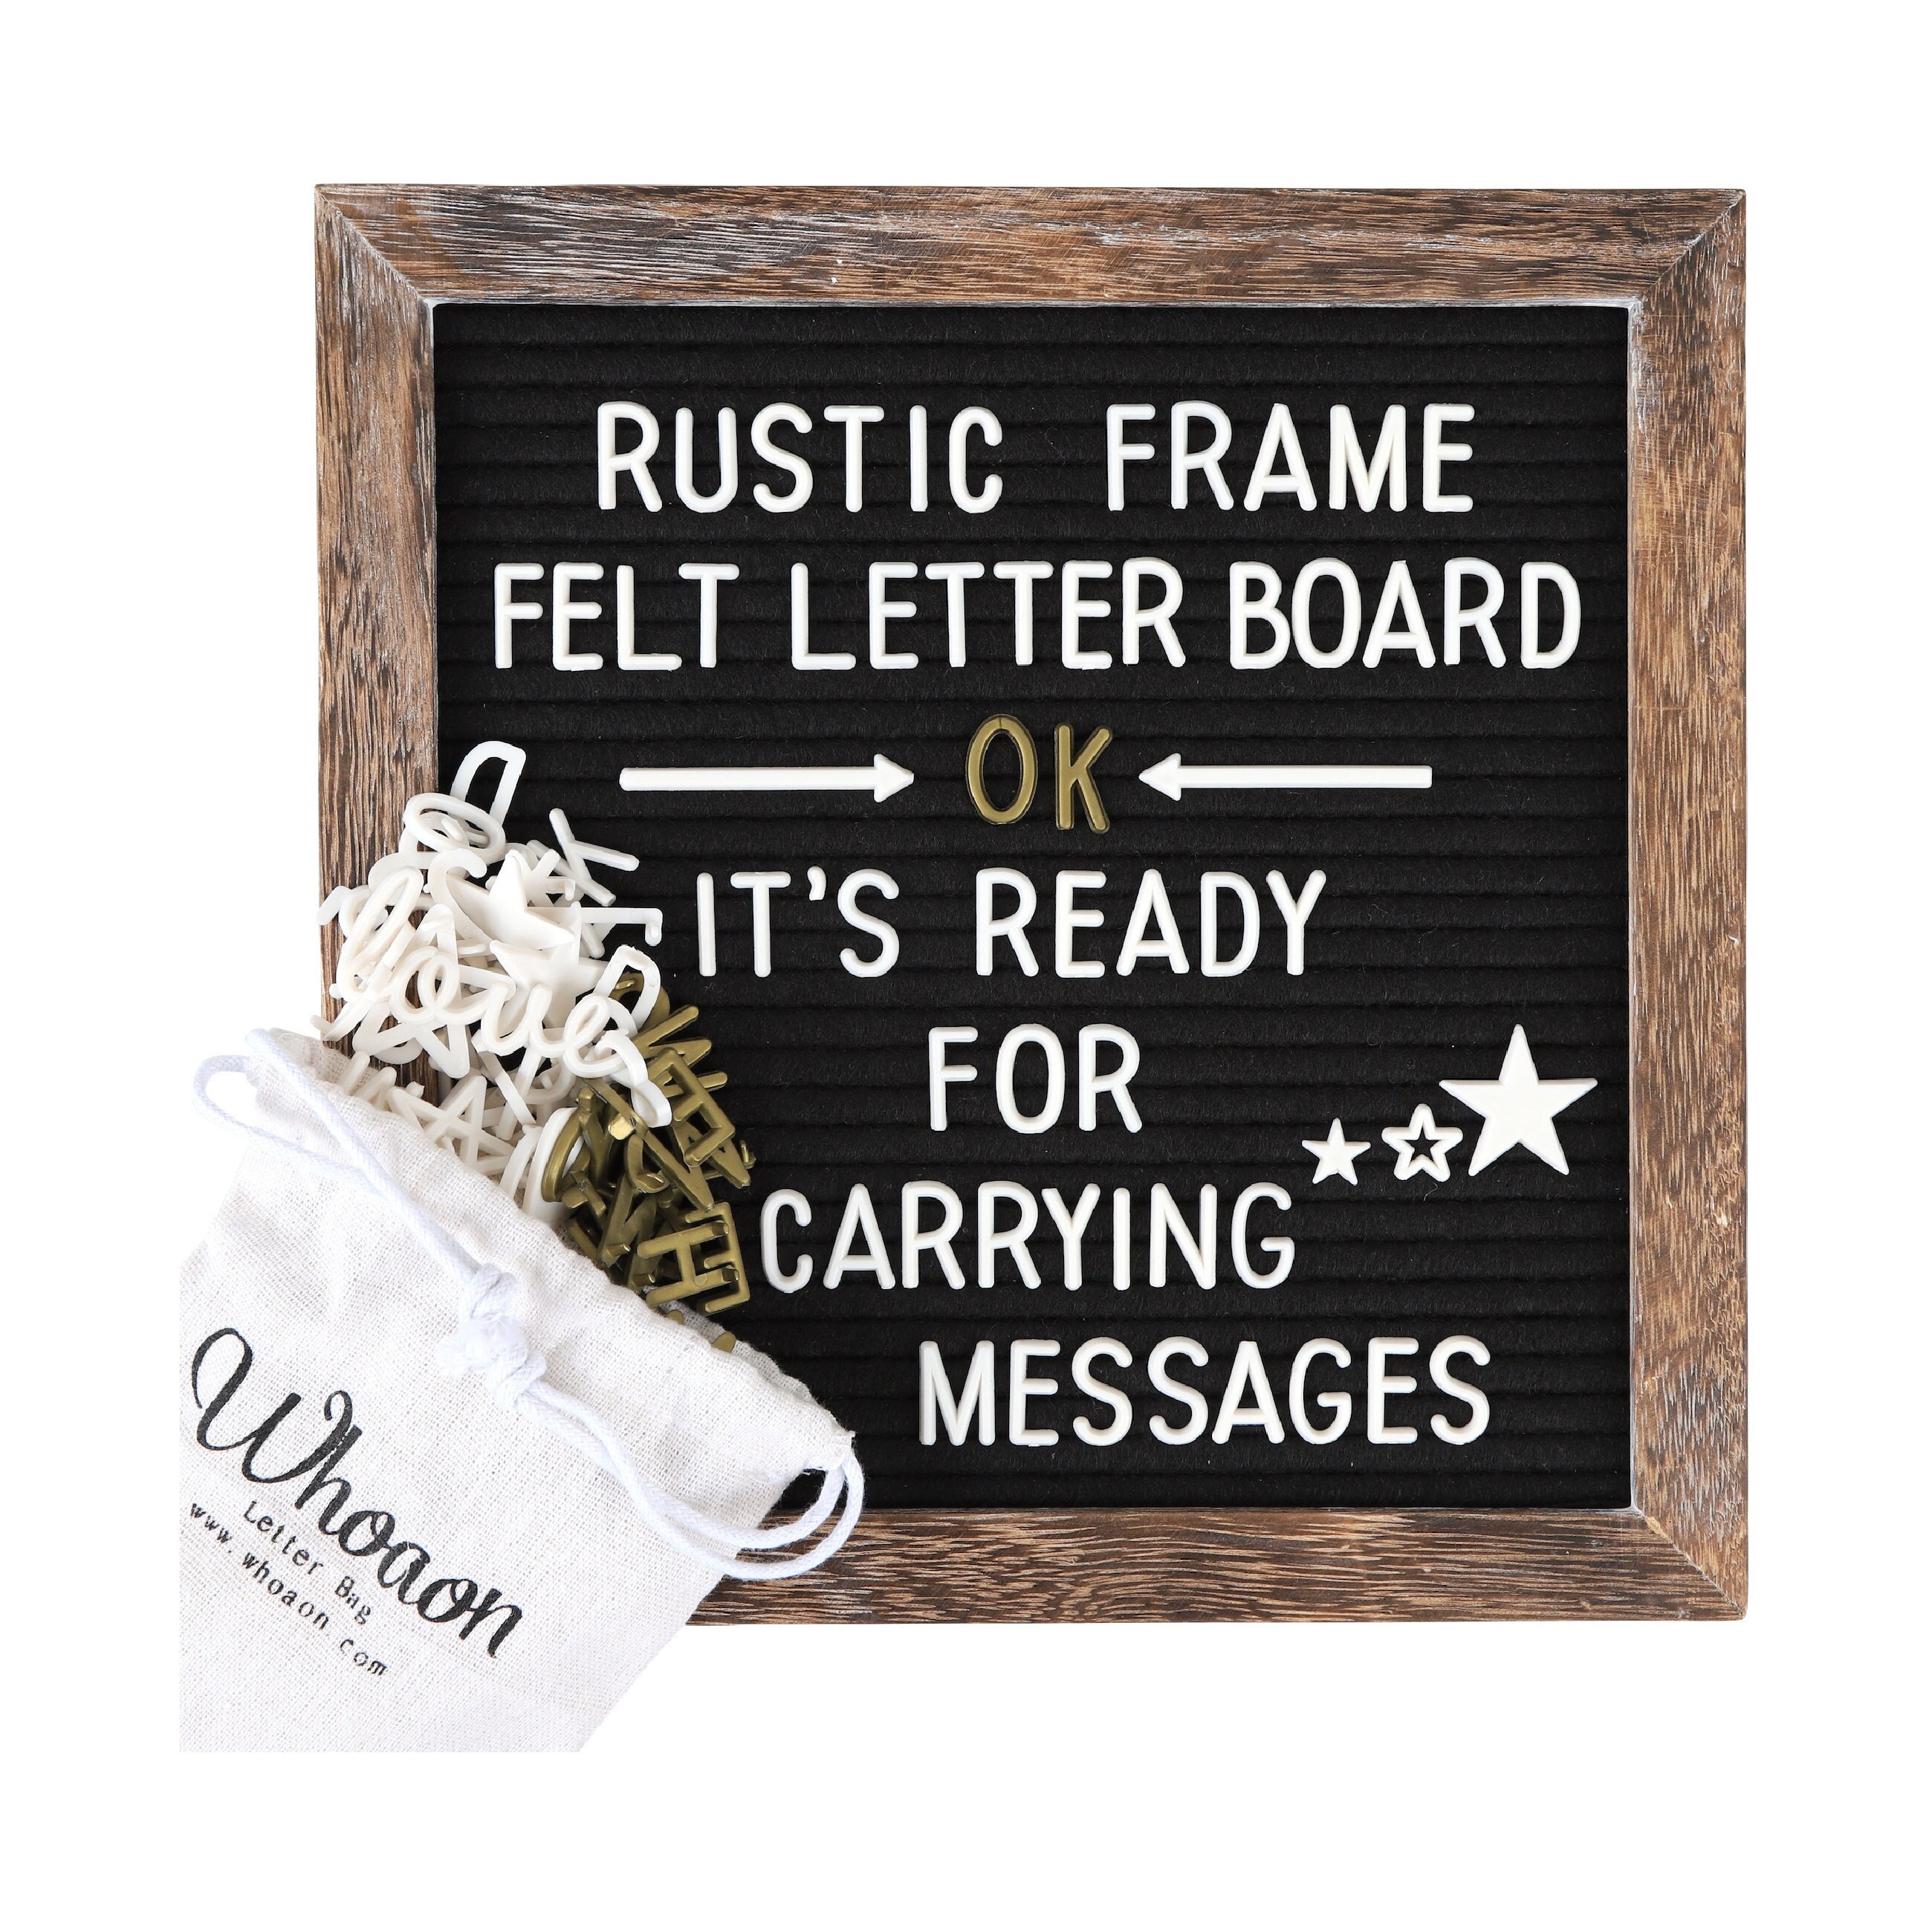 Letter Board, Felt Letter Board, 10x10 inches, Changeable Wooden Message  Board Sign, Wood Frame, Wall Mount, with Display Stand (White) by C Crystal  Lemon 